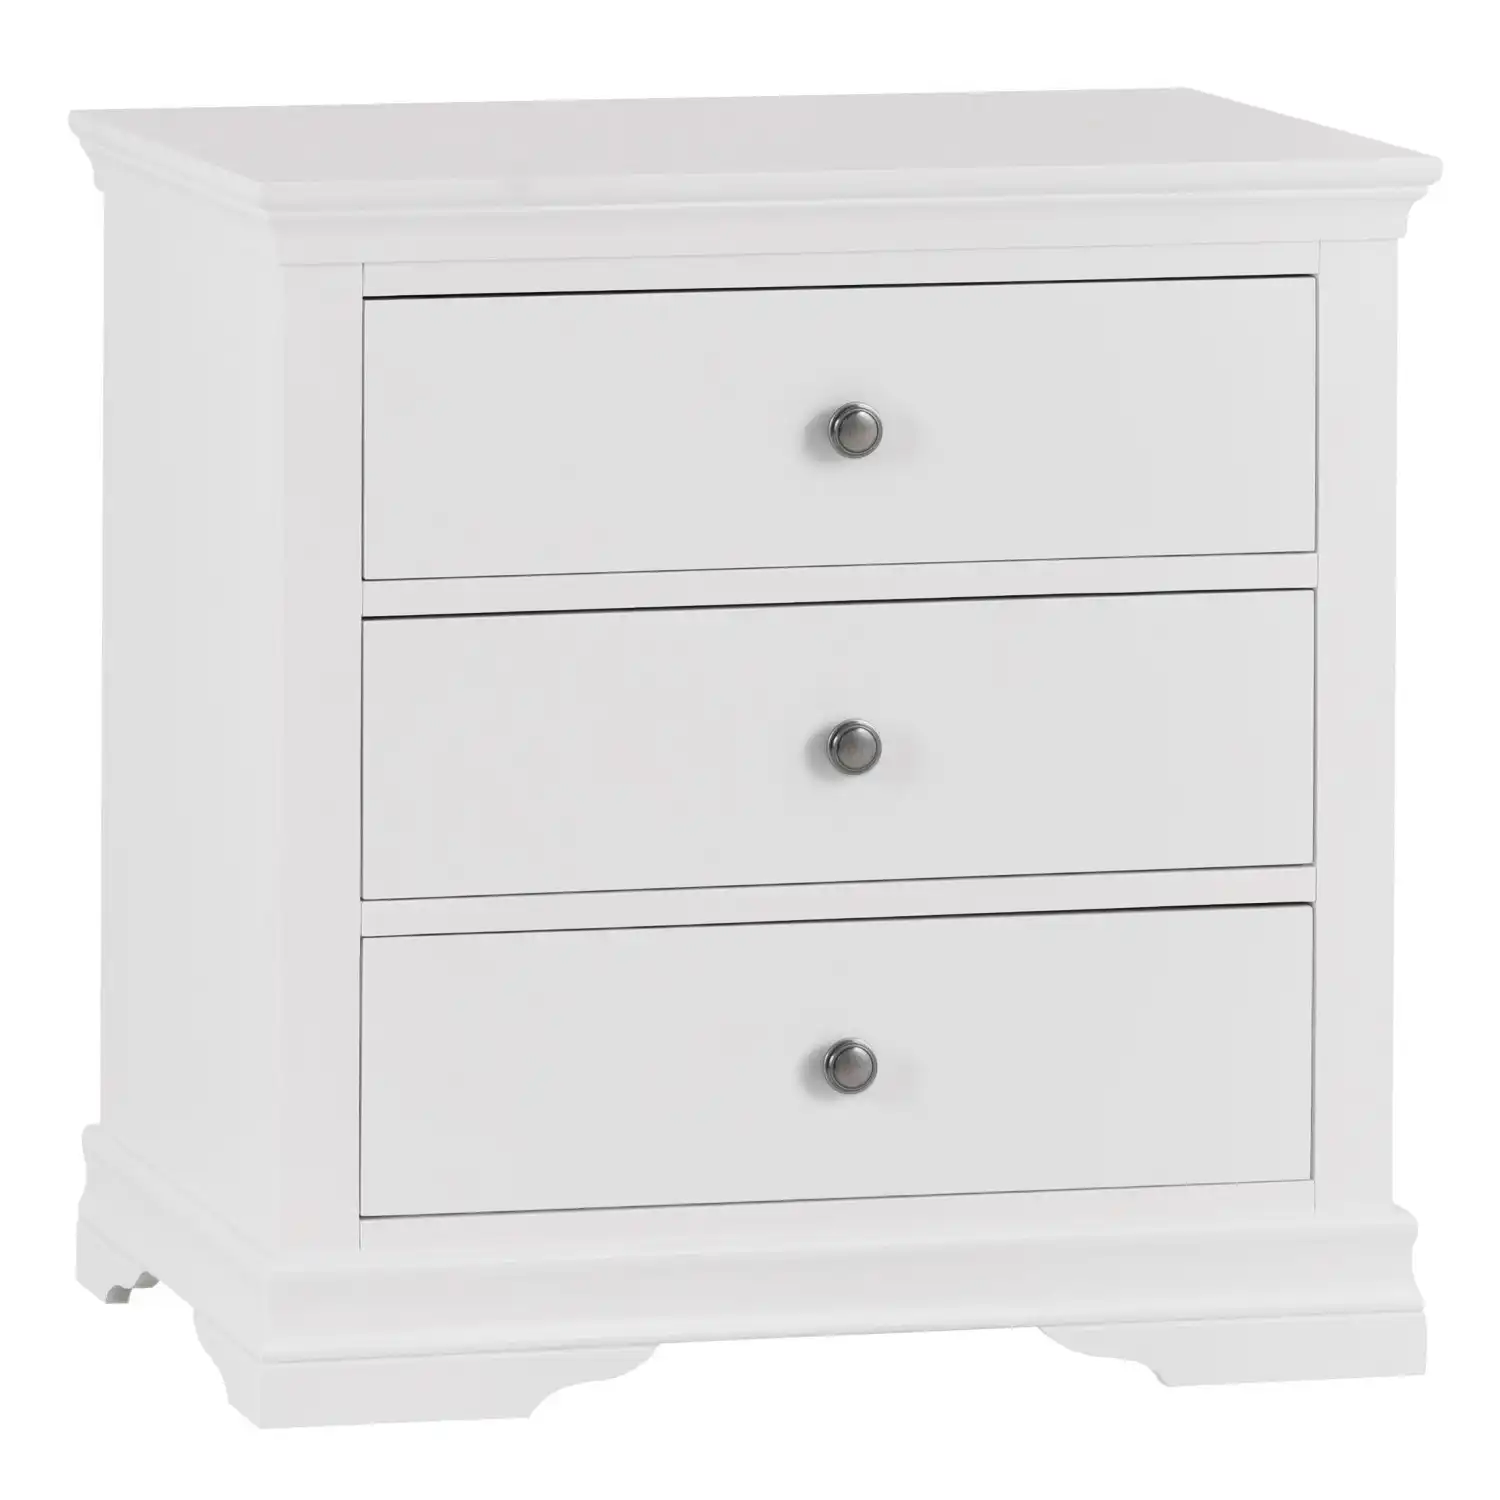 Pair Of White Bedside Chest of Drawers